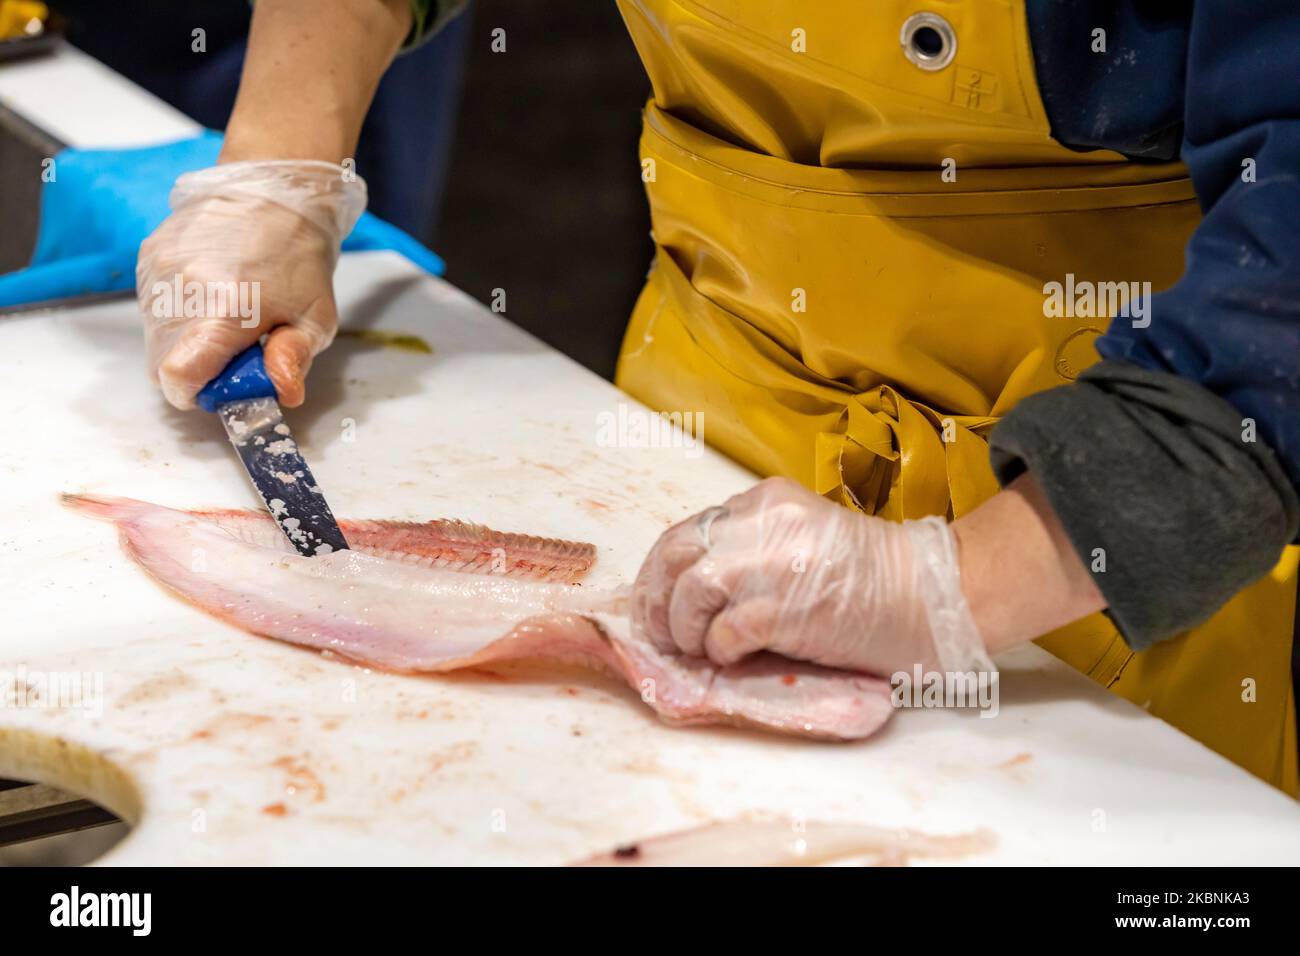 Fish counter in a Leclerc supermarket. Close up shot of the hands of a fishmonger cutting fillets from a fish. Stock Photo